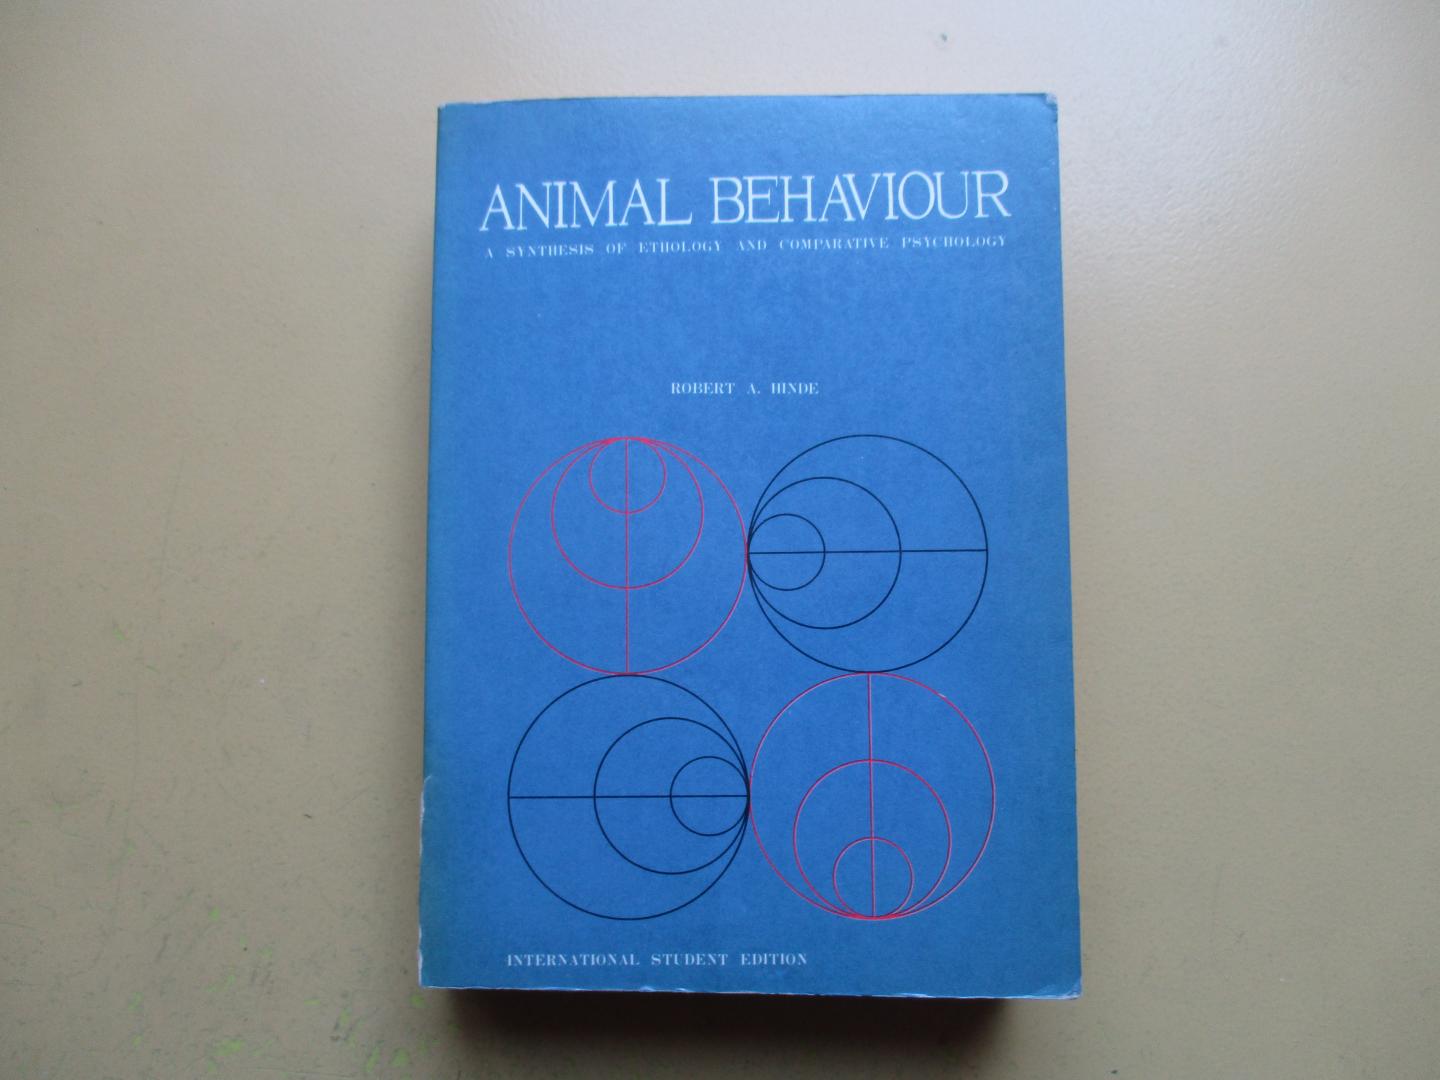 Hinde, Robert A. - Animal Behaviour - A Synthesis of Ethology and Comparative Psychology